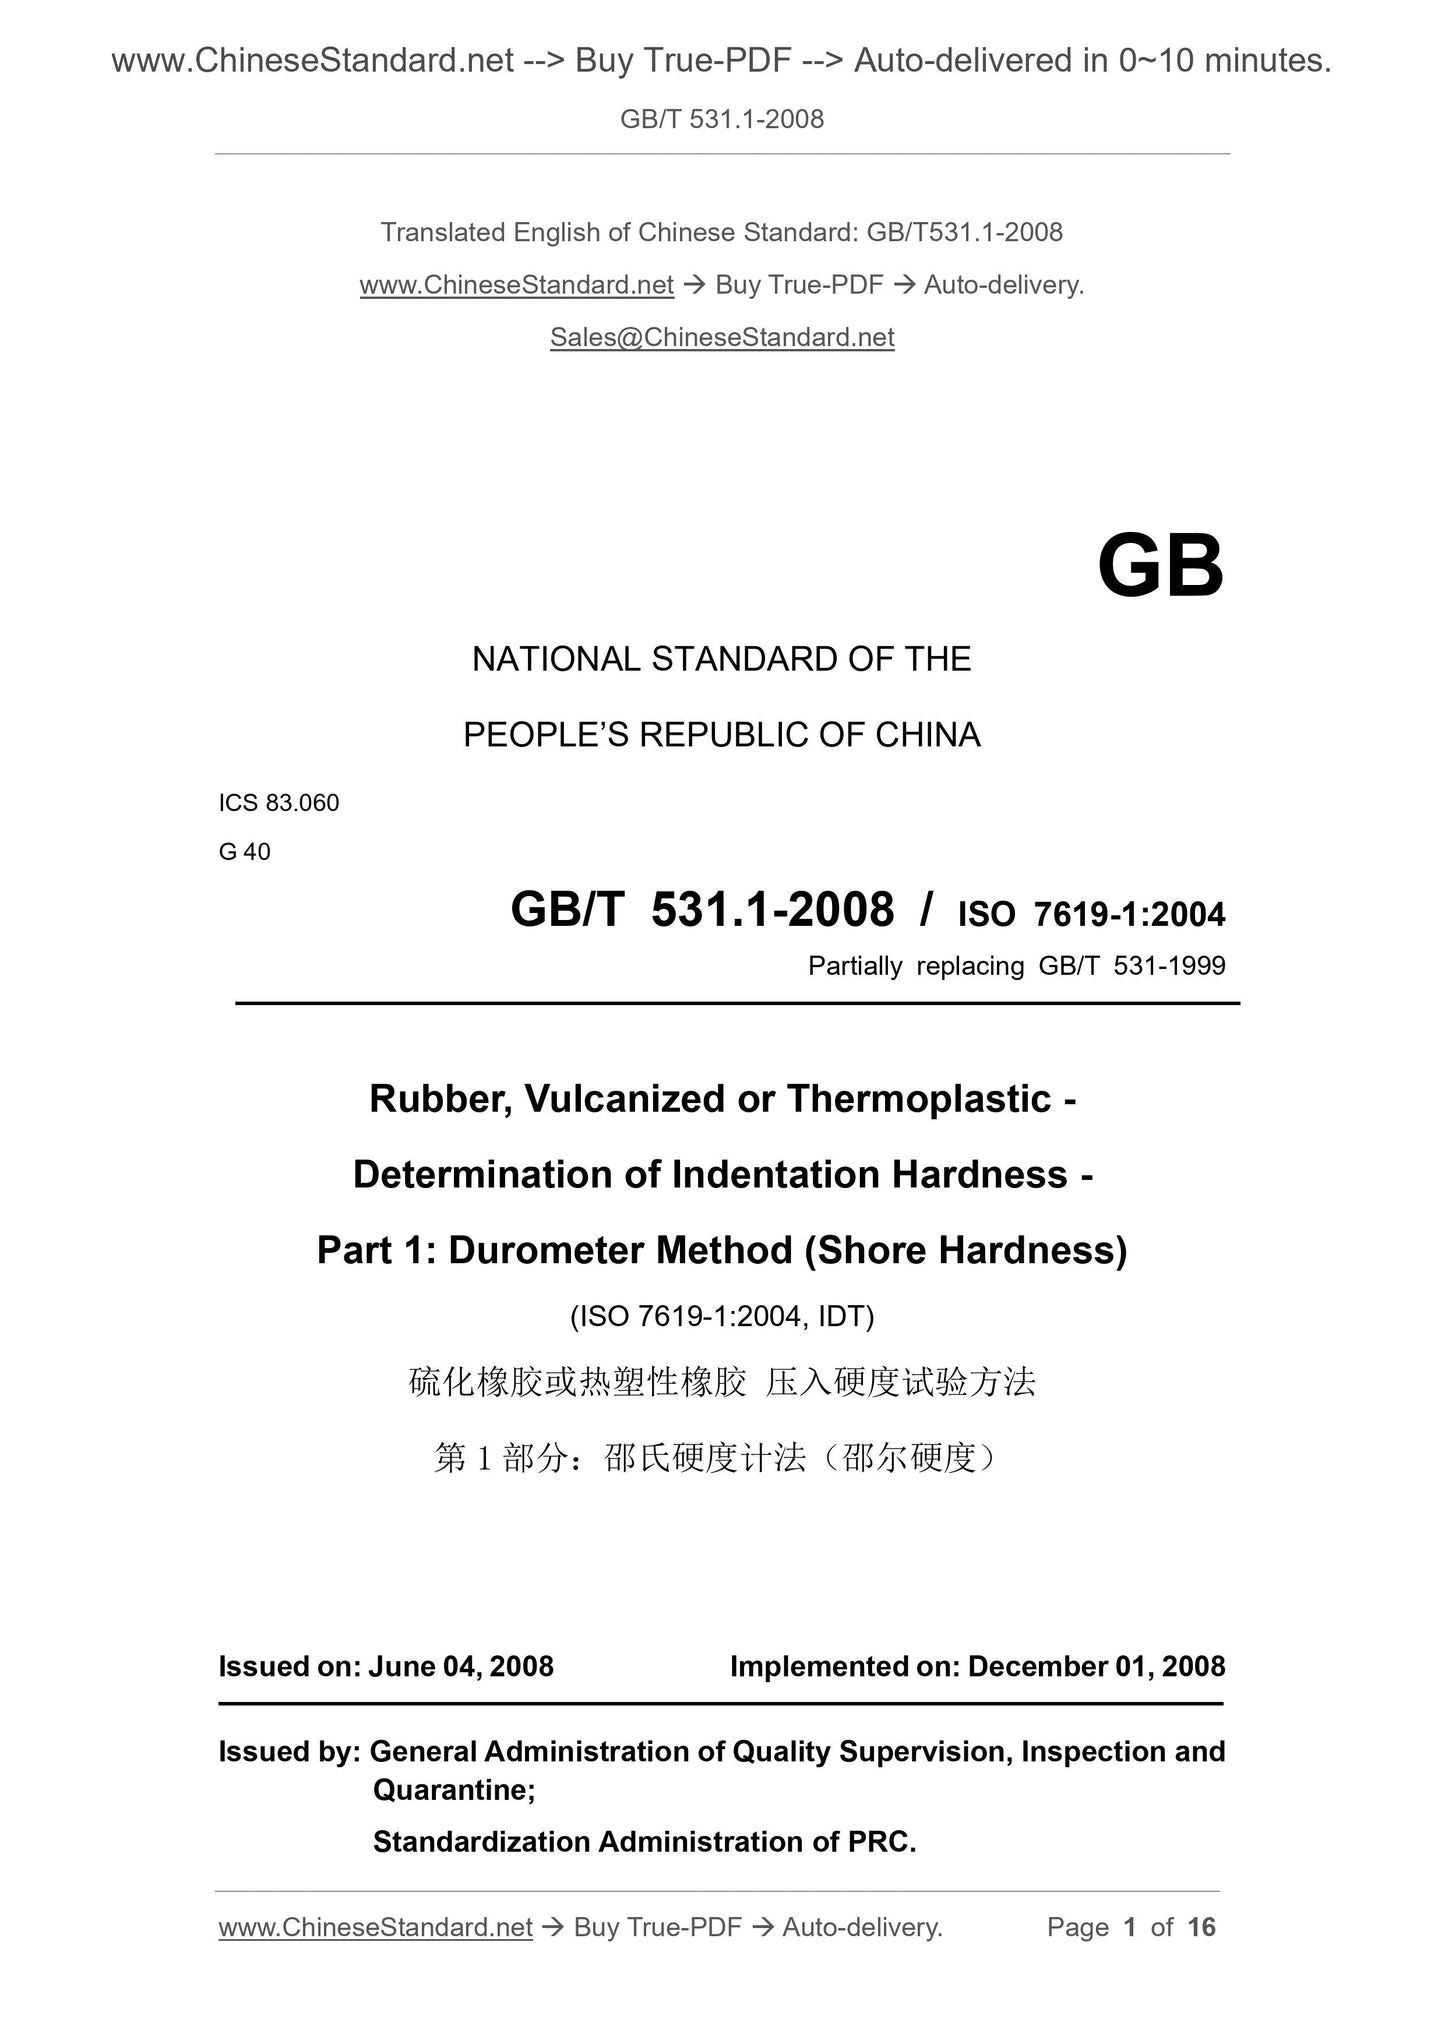 GB/T 531.1-2008 Page 1